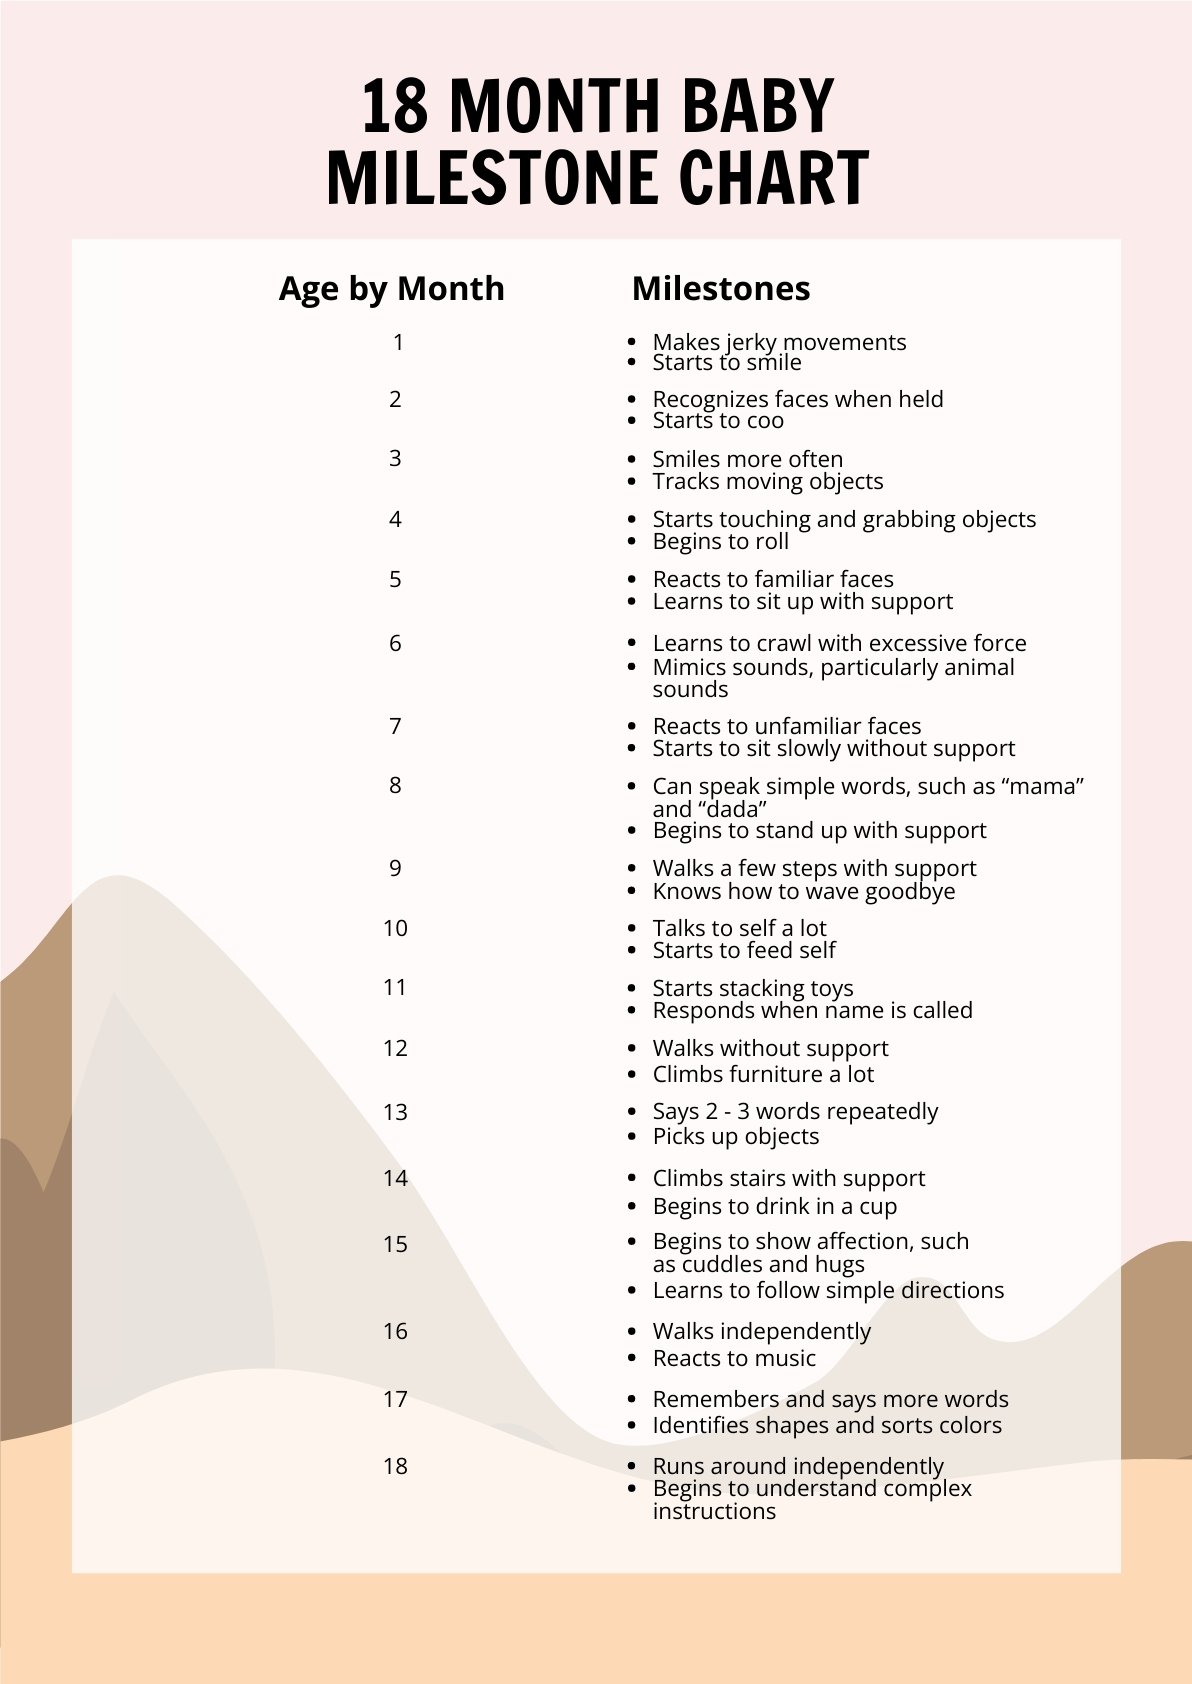 18 Month Baby Milestone Chart in PDF